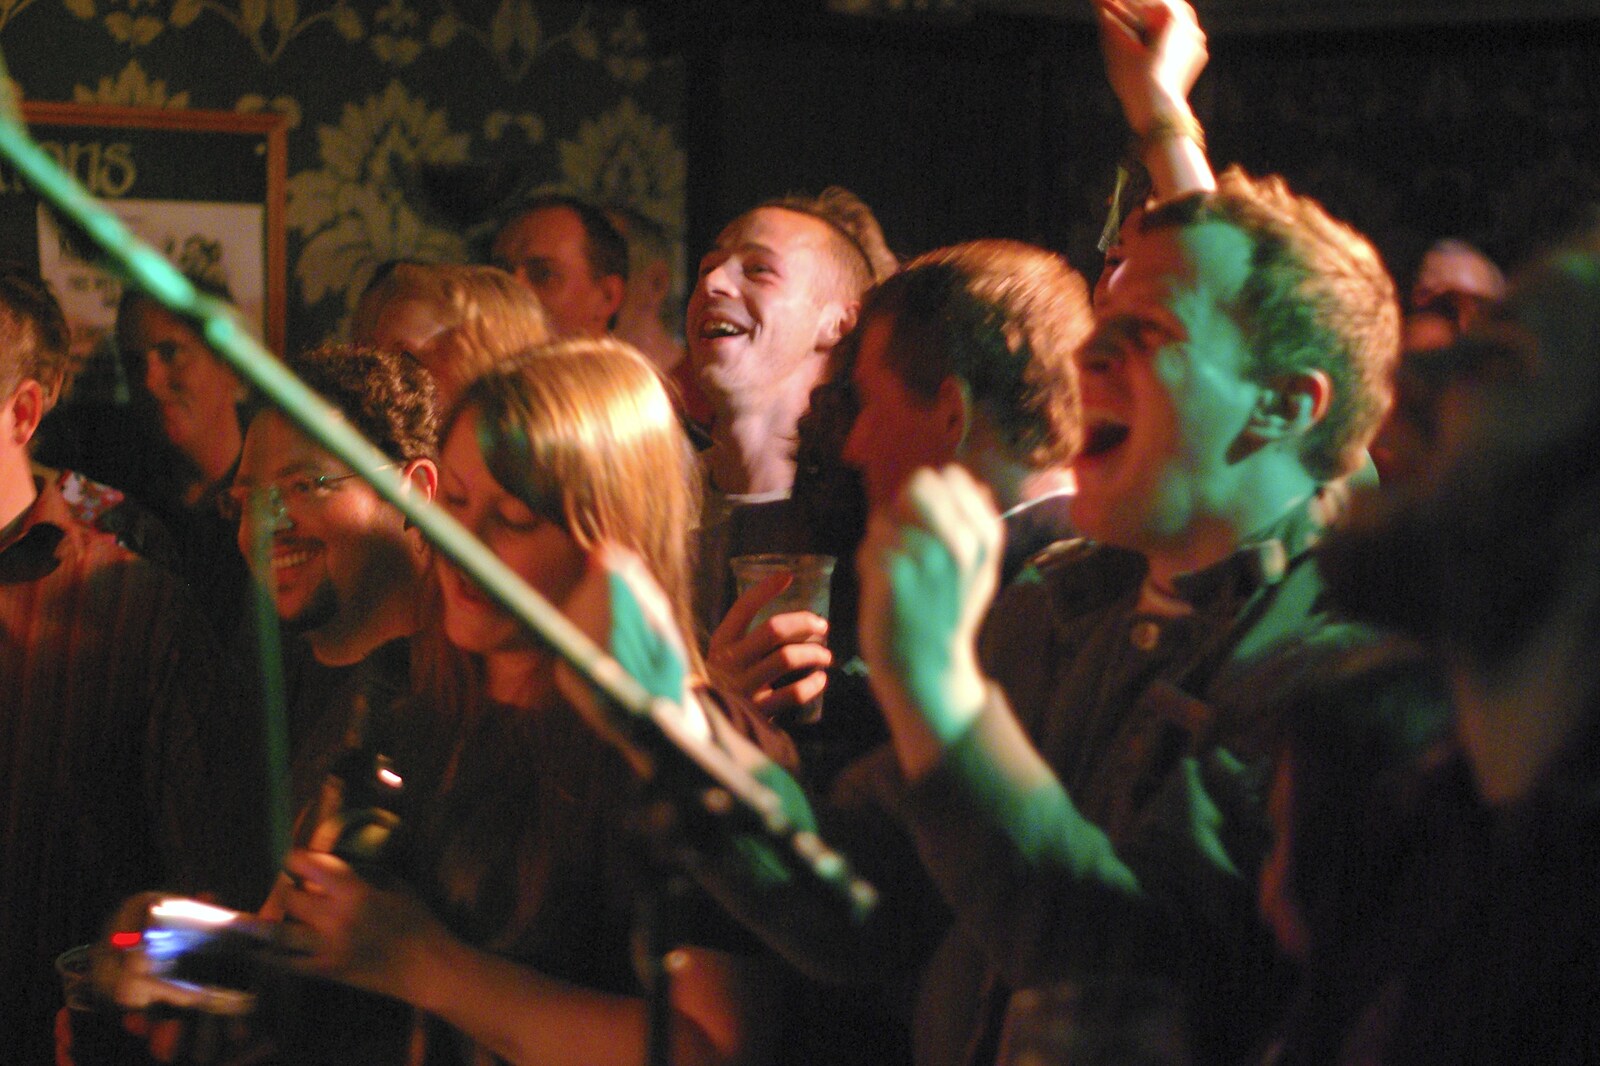 The Shivers Live at the Portland Arms, Cambridge - 26th August 2007: Crowd adoration